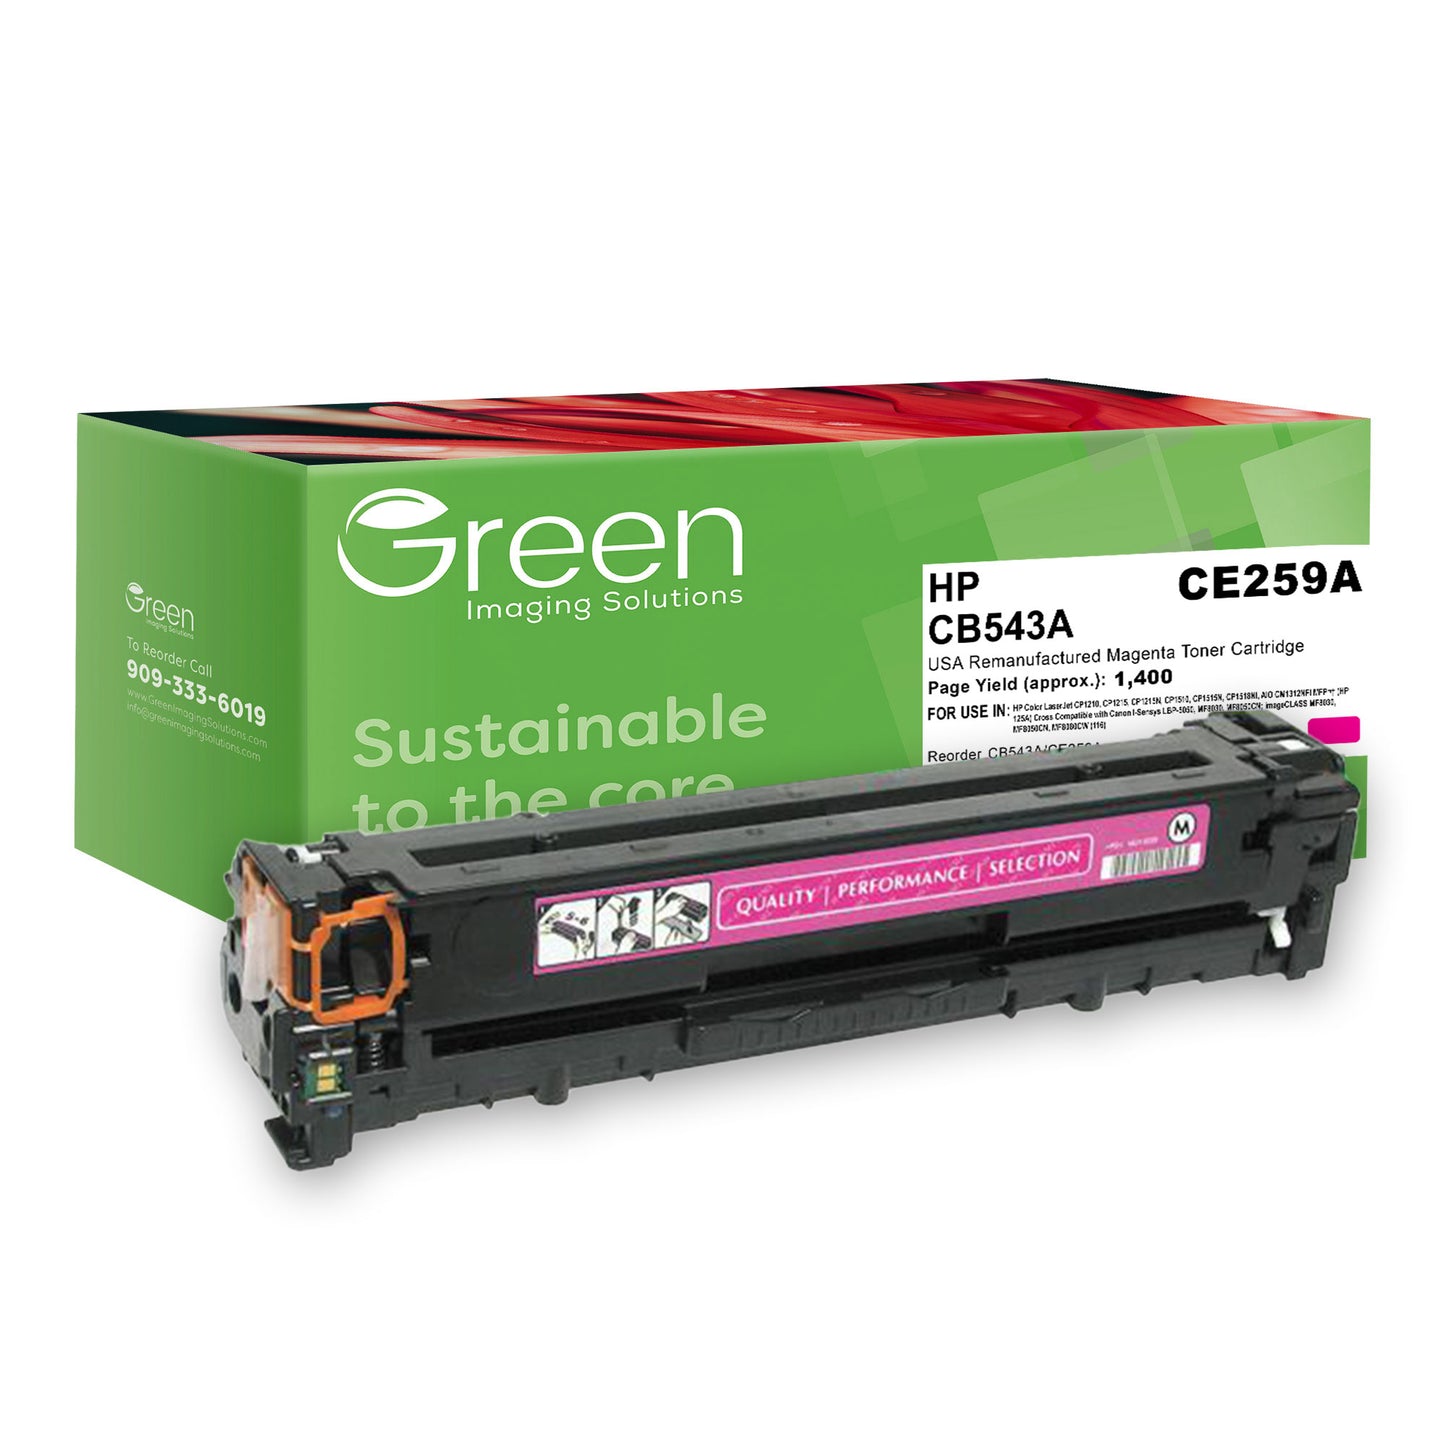 GIS USA Remanufactured Magenta Toner Cartridge for HP CB543A (HP 125A)